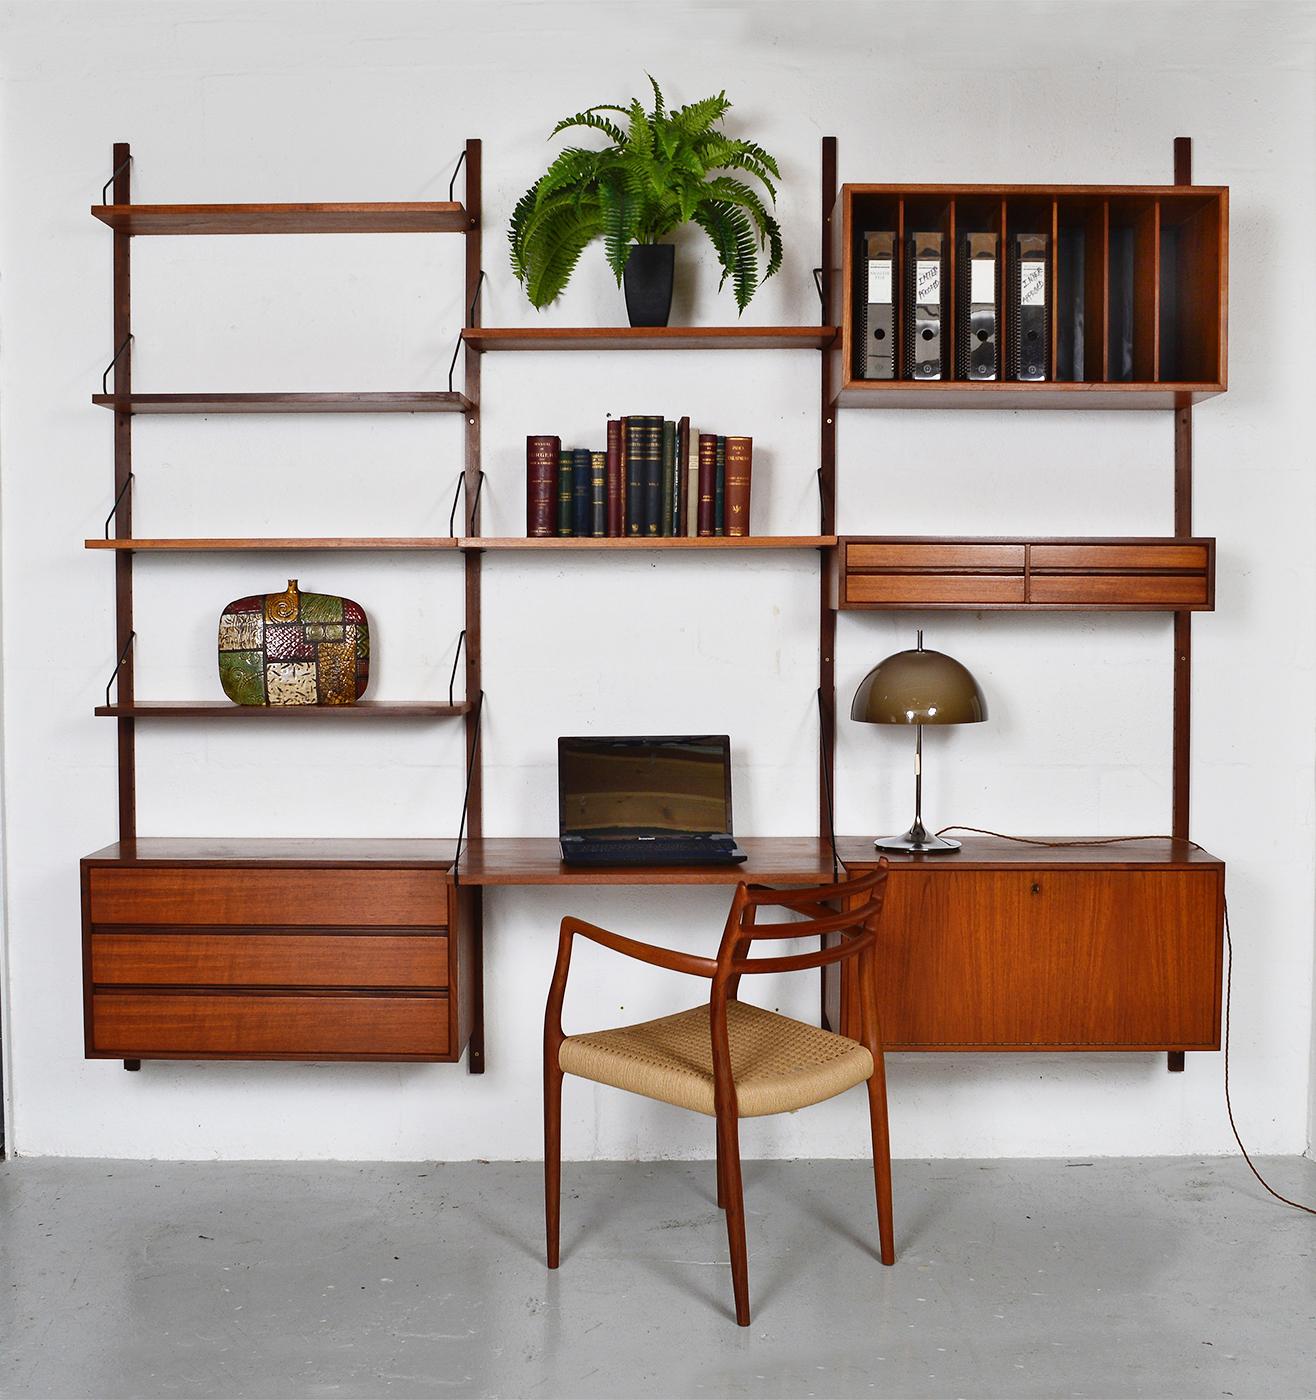 This highly versatile and functional “Royal System” was first designed in 1948 by Poul Cadovius. Offering the complete home office, and being modular, a variety of display options. The metal supports compliment the teak timber and gives this piece a